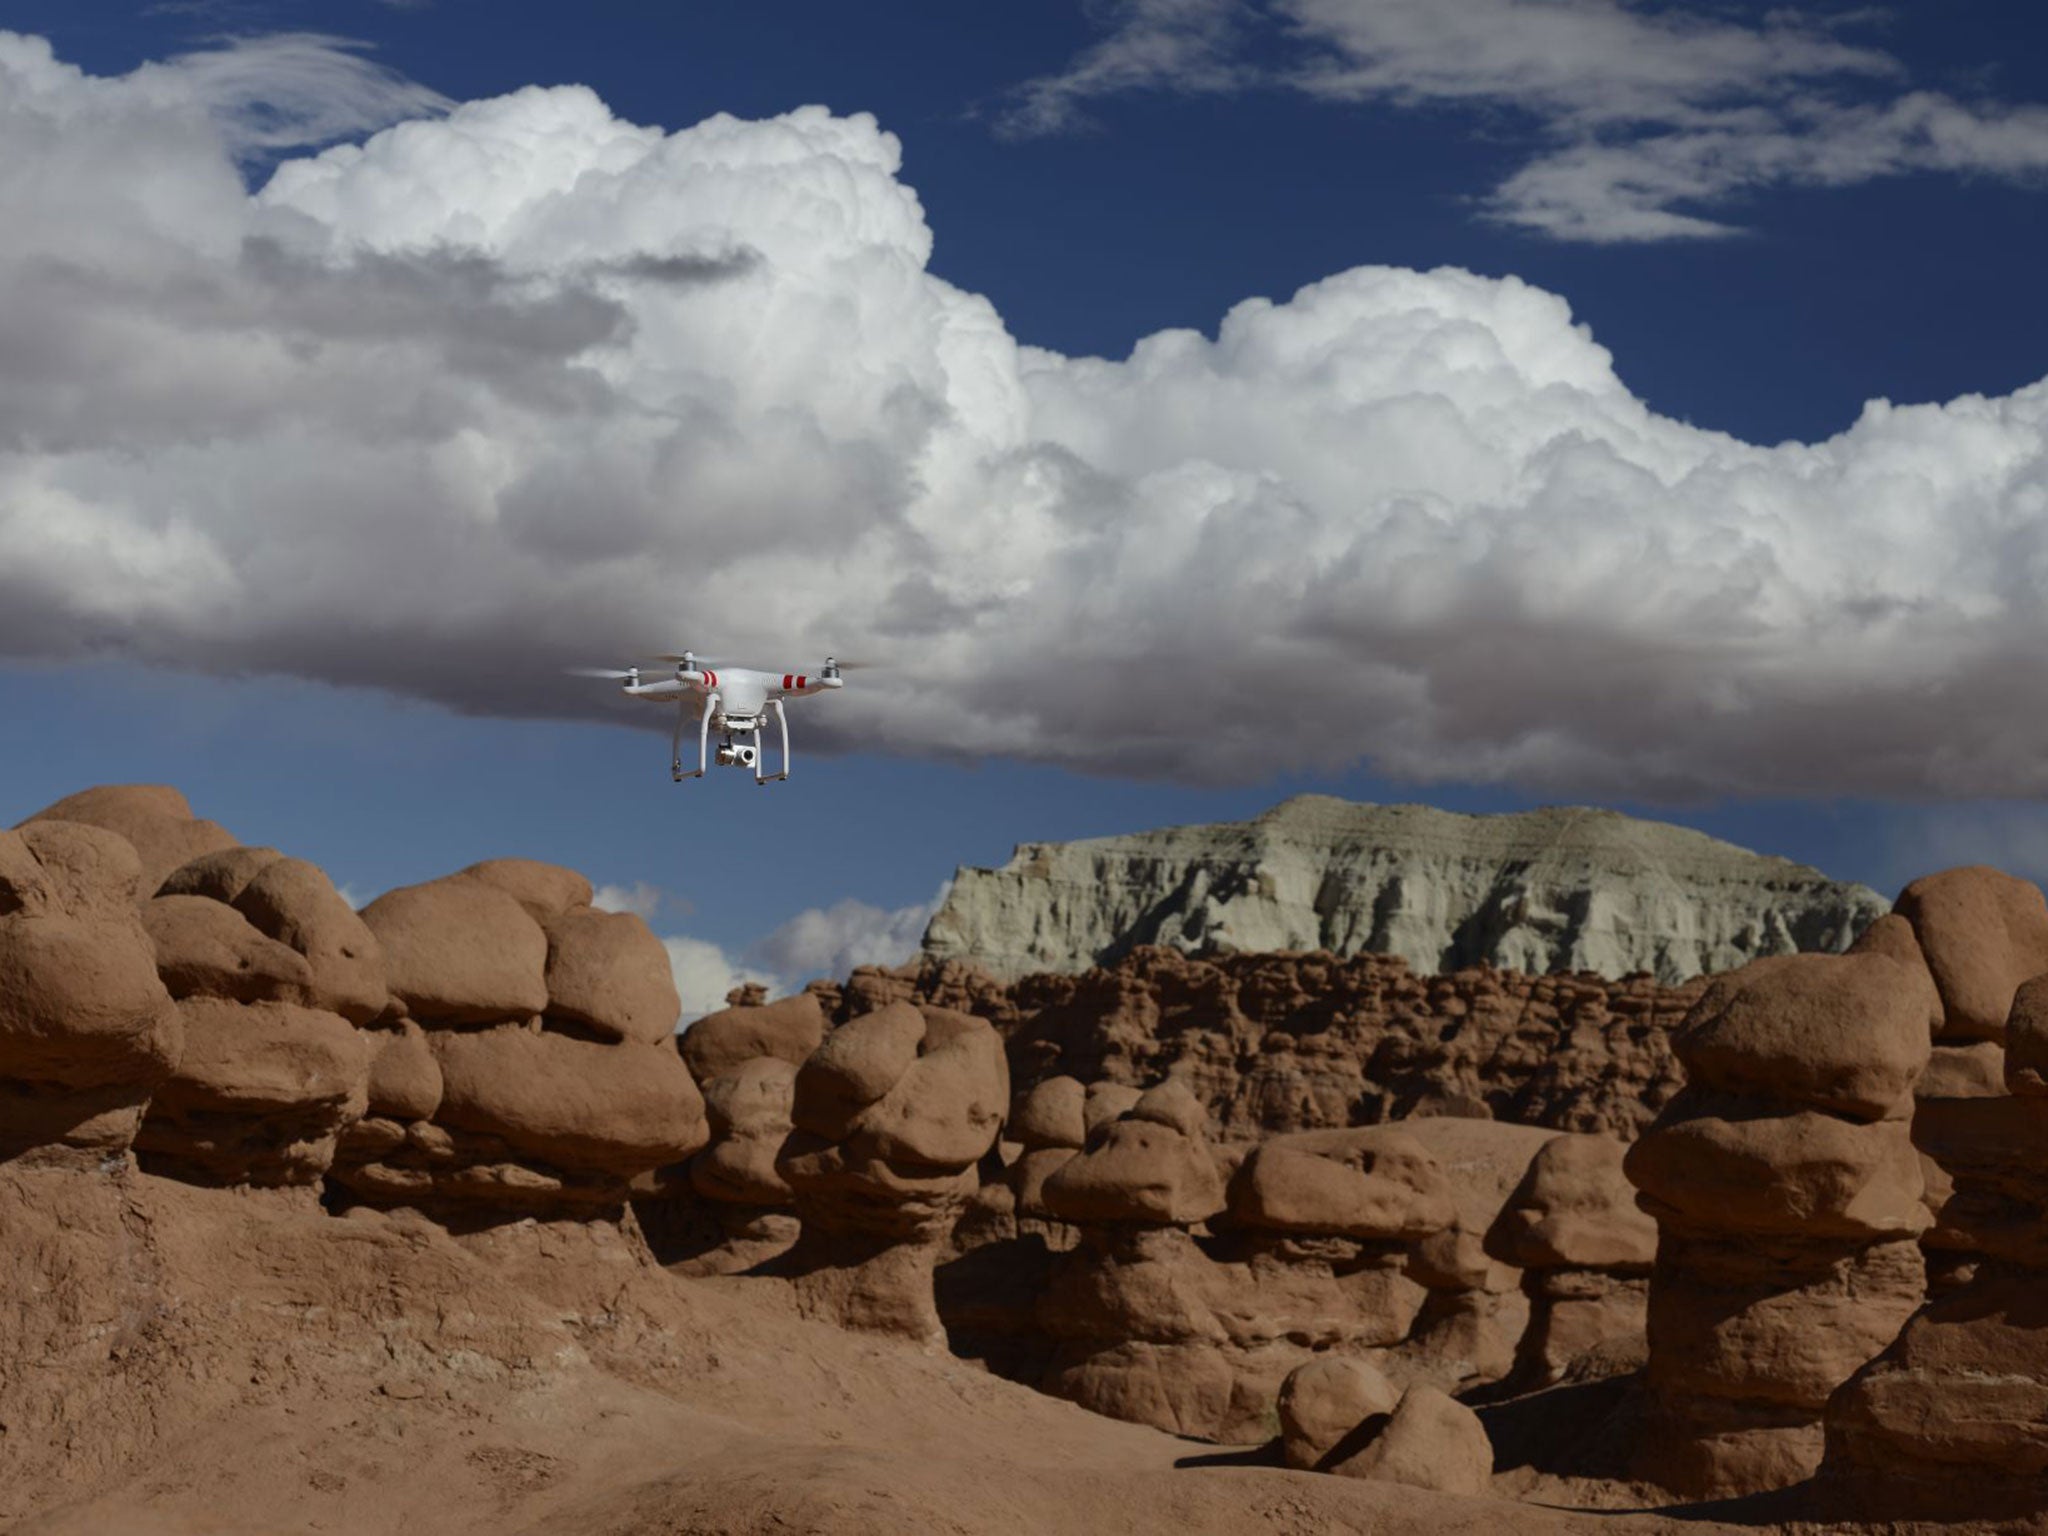 Up in the air: a DJI Phantom drone takes to the sky